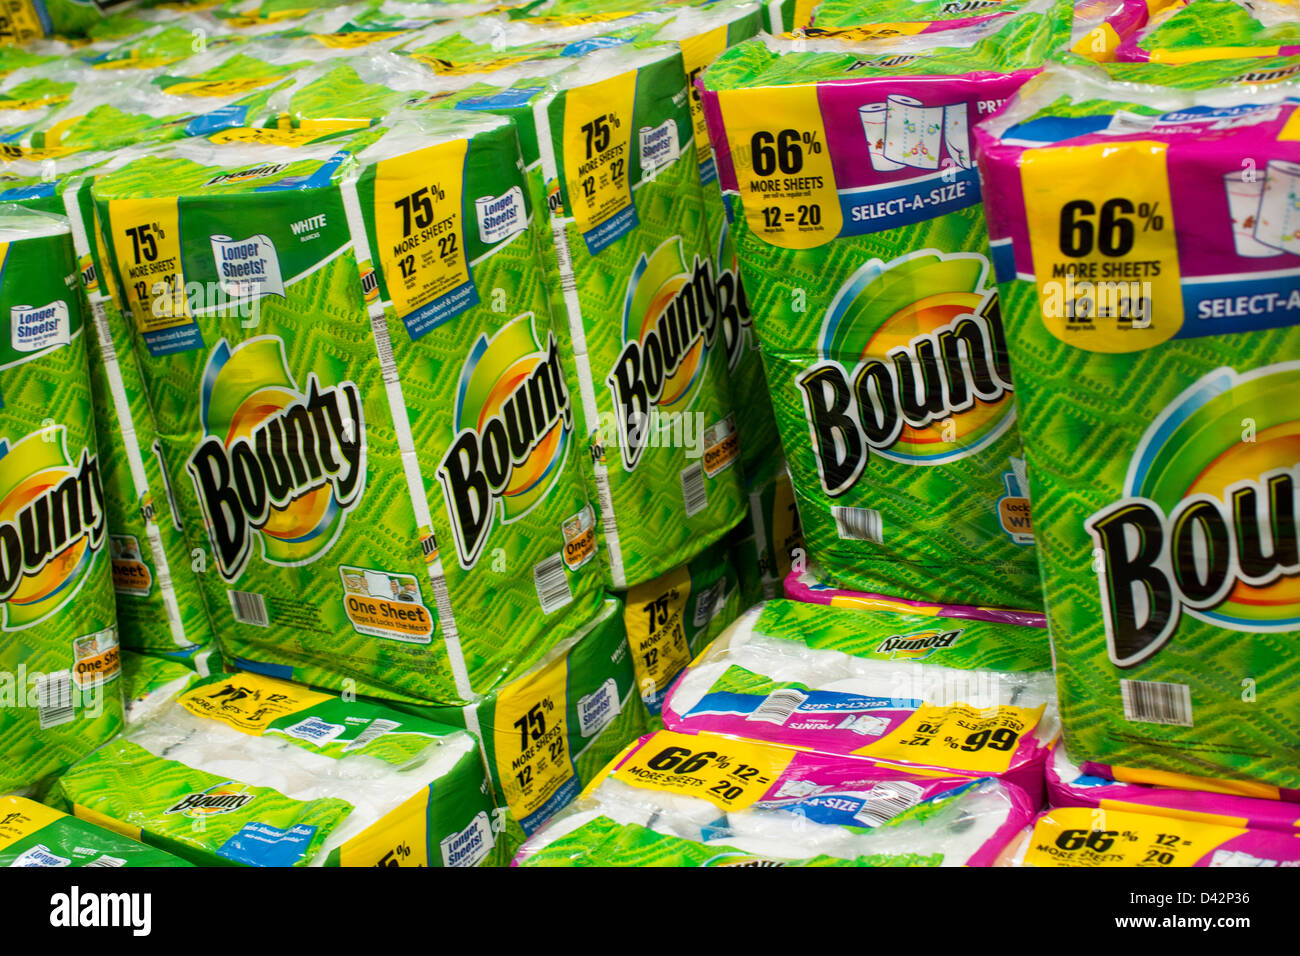 Bounty paper towels on display at a Costco Wholesale Warehouse Club. Stock Photo